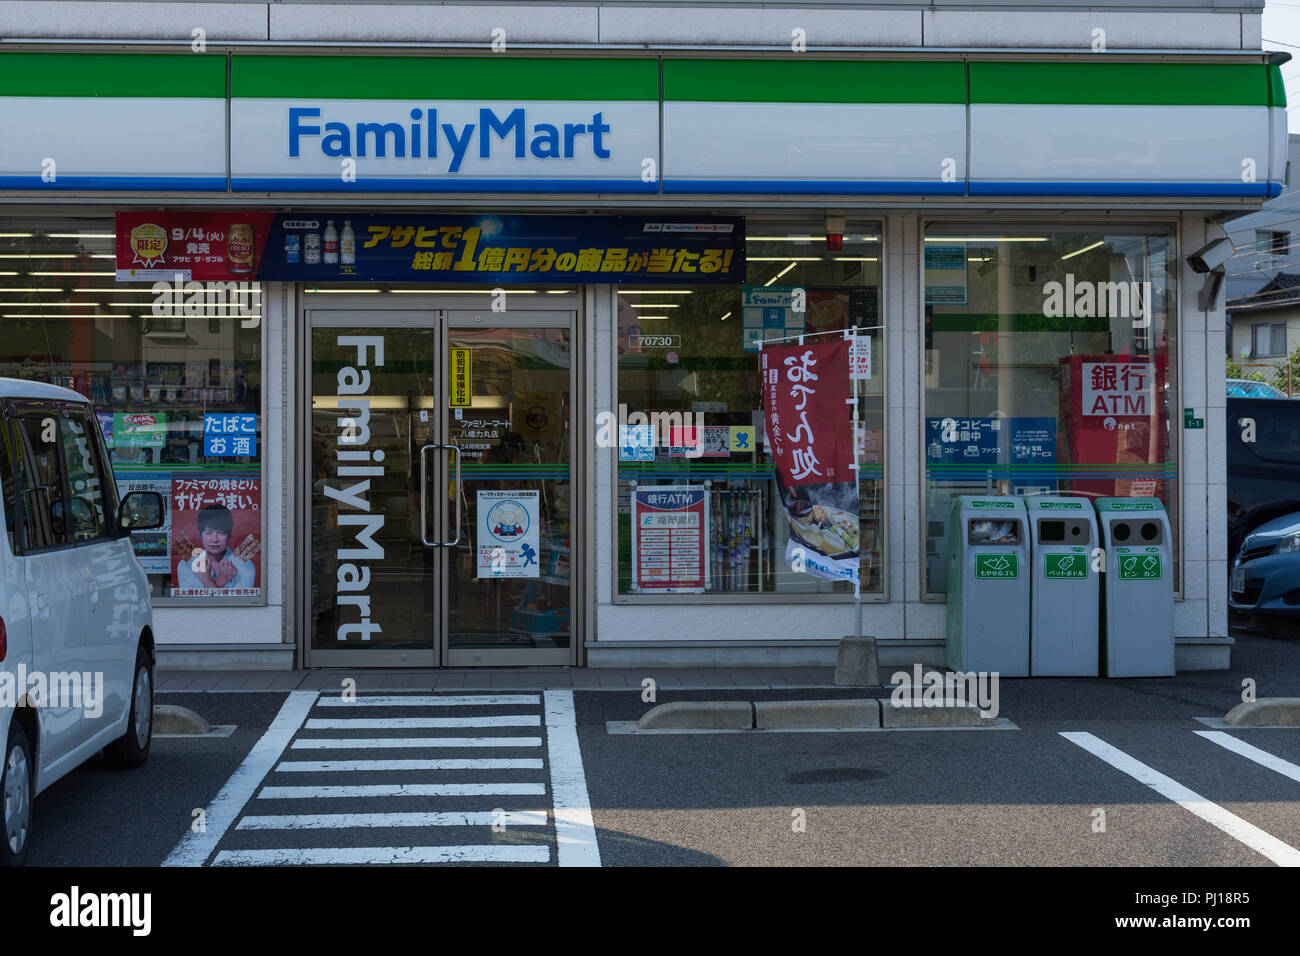 Family Mart Convenience Store in Giappone Foto Stock